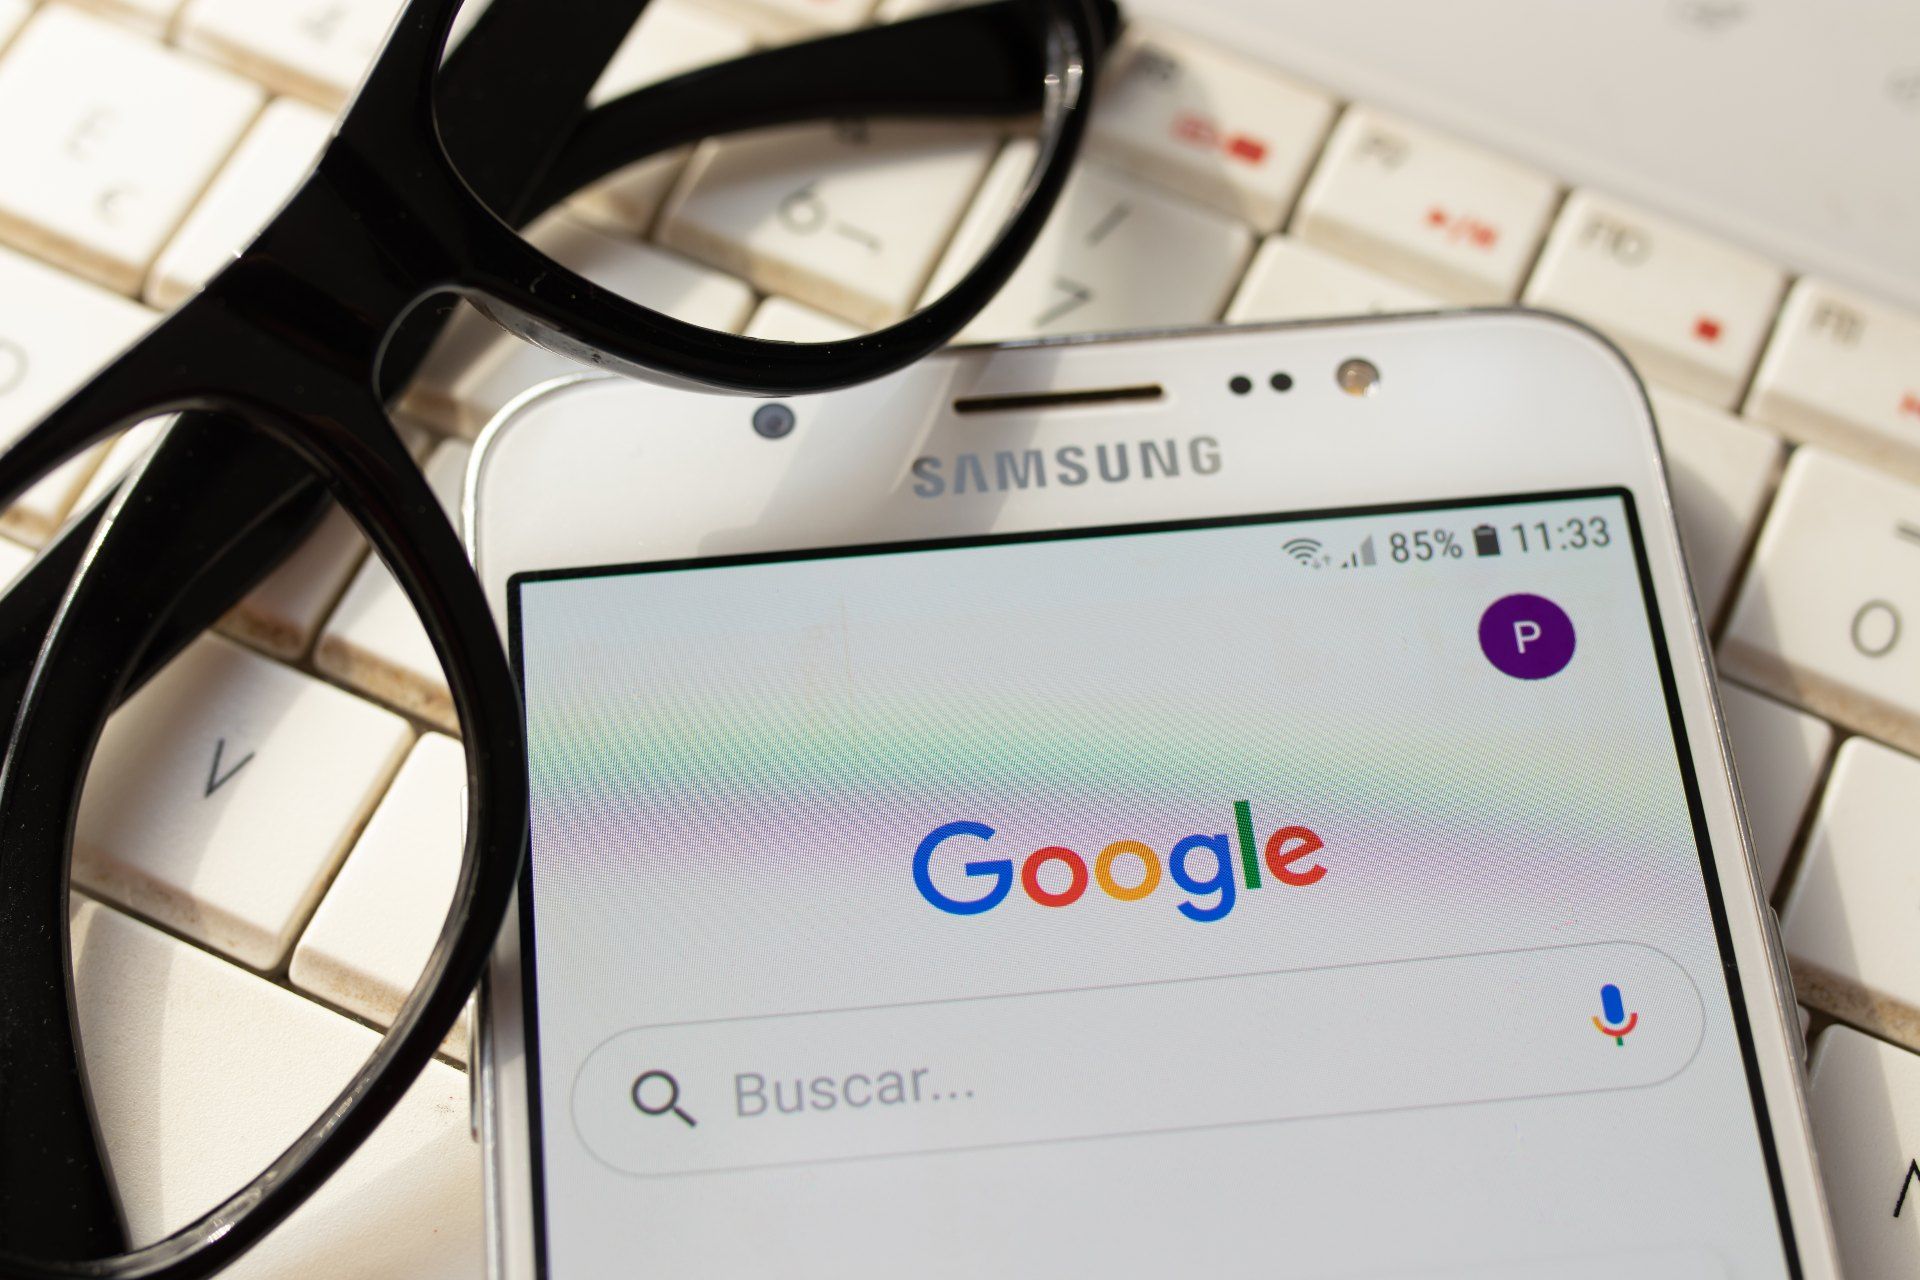 A Samsung smartphone with Google on the screen sits with glasses on top of a keyboard - Google tracking